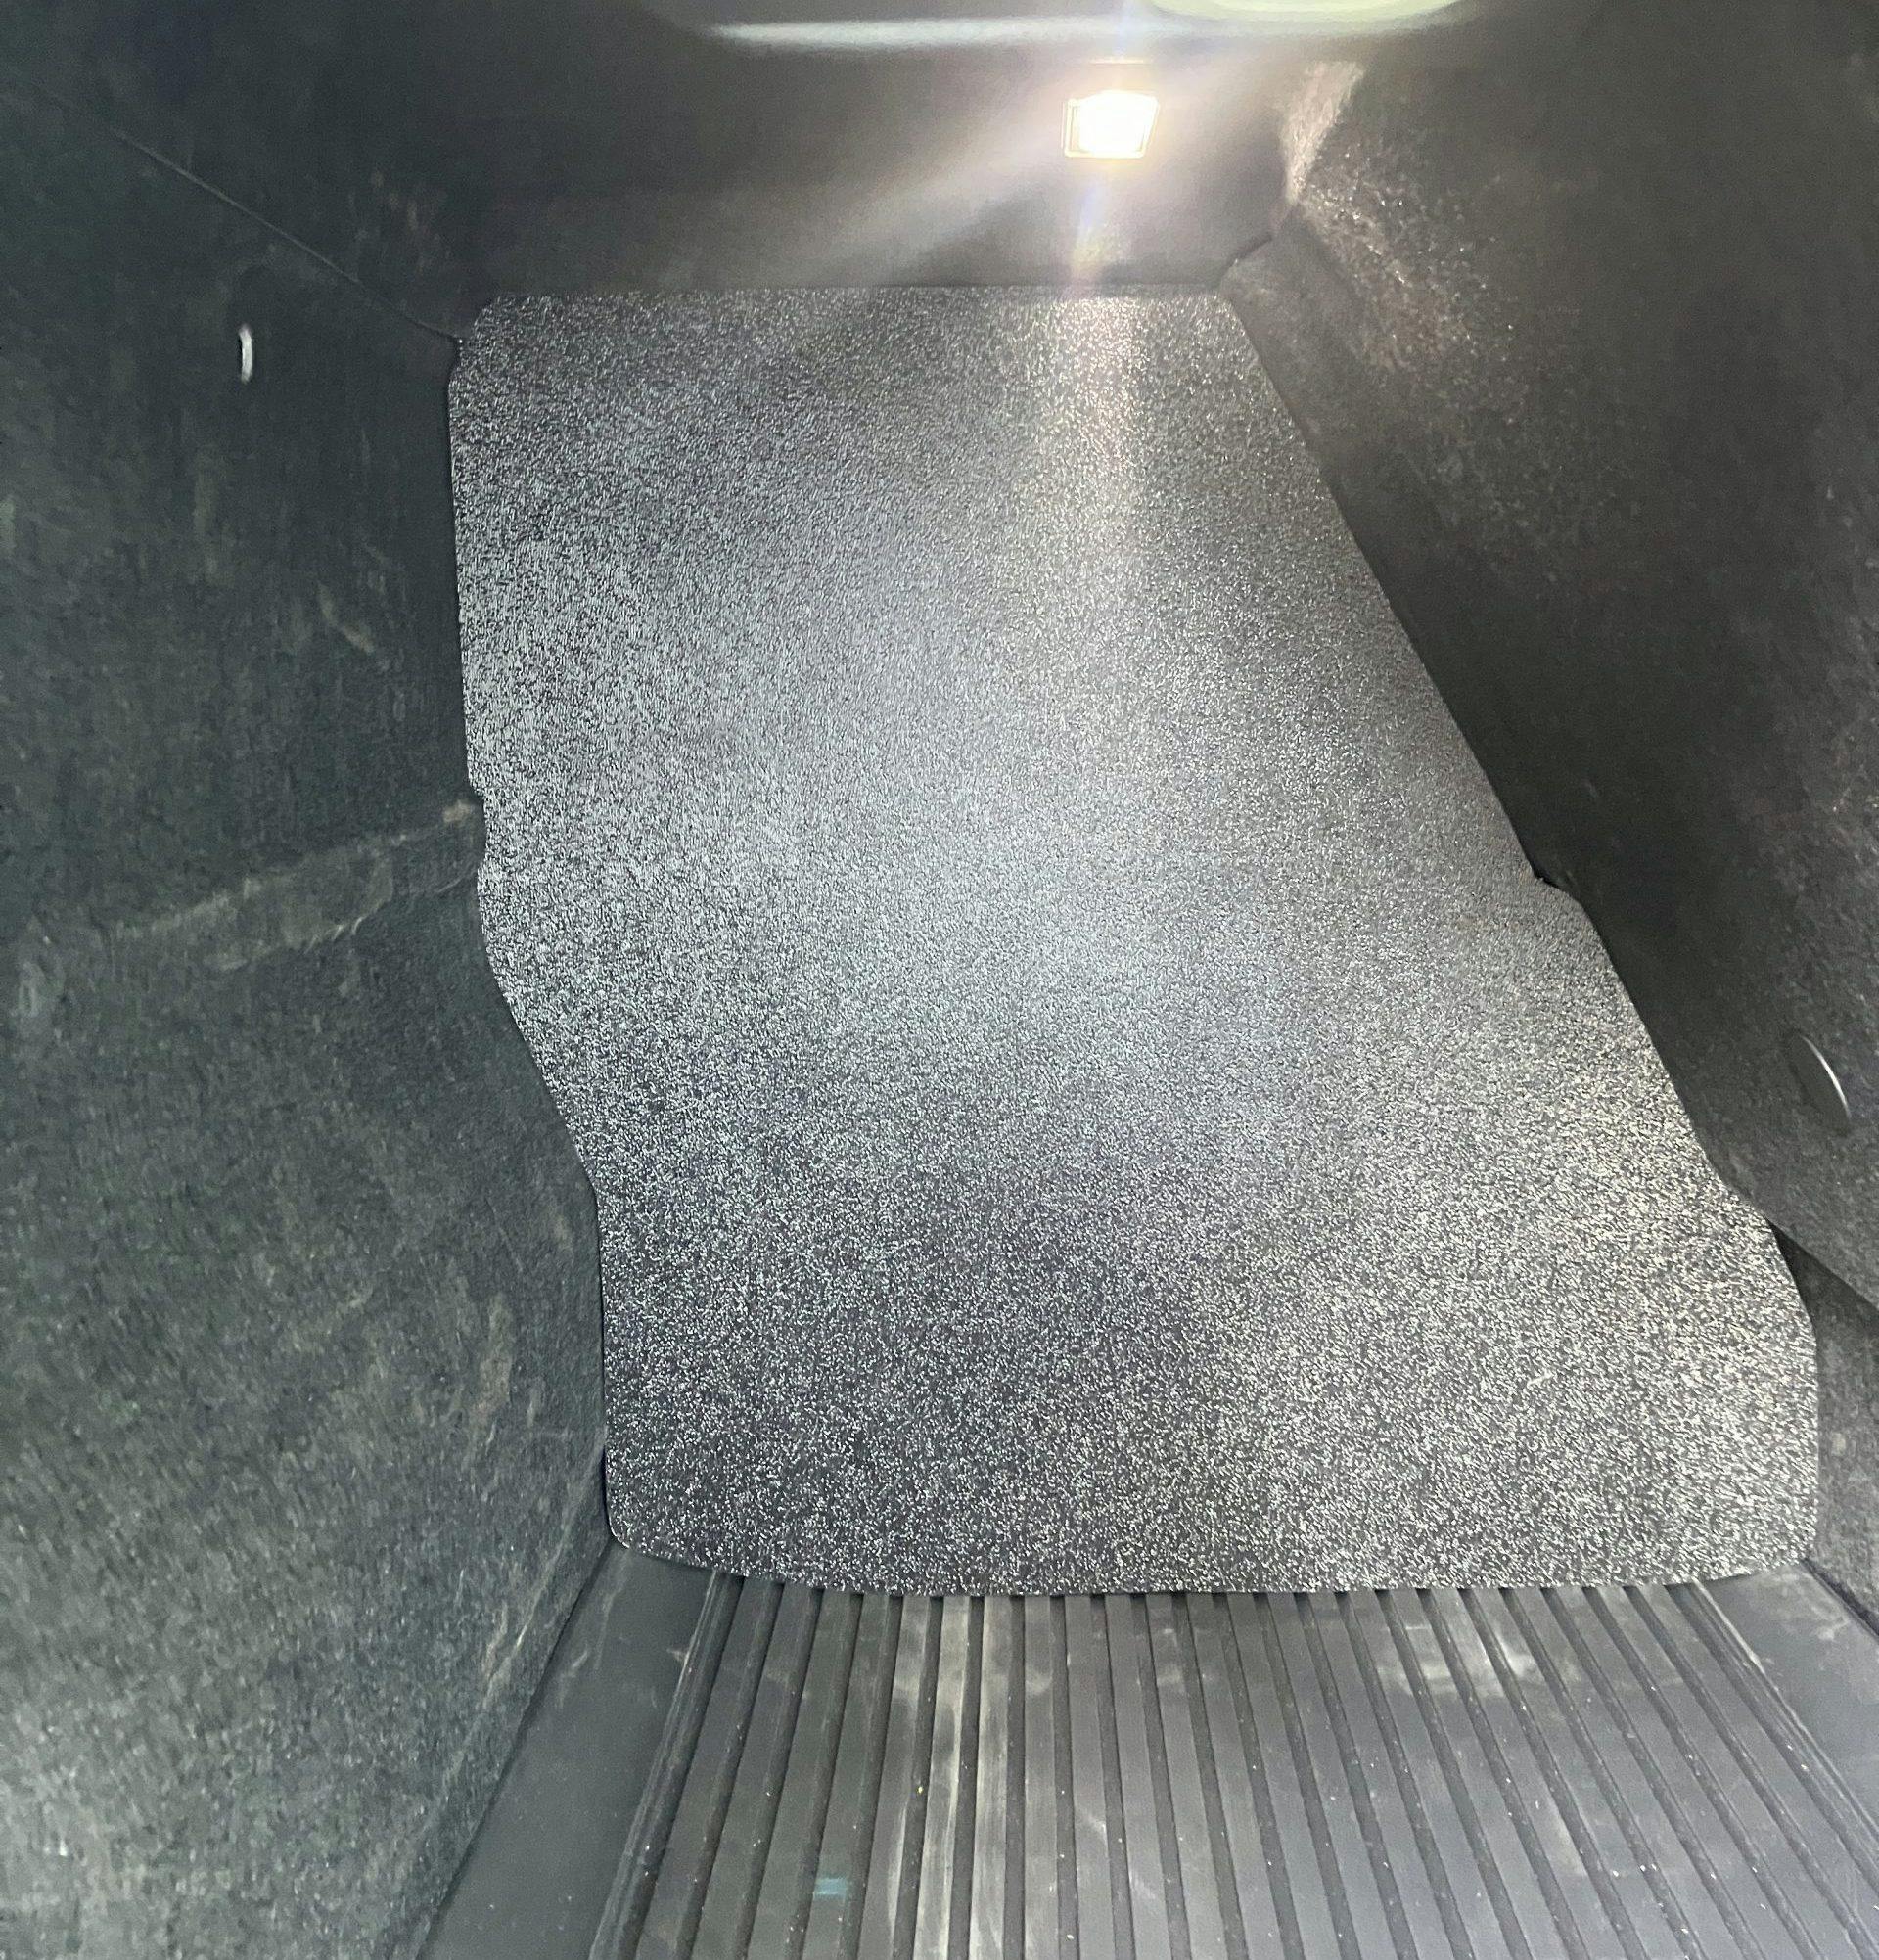 2022 Rivian R1T Launch Edition pass through compartment